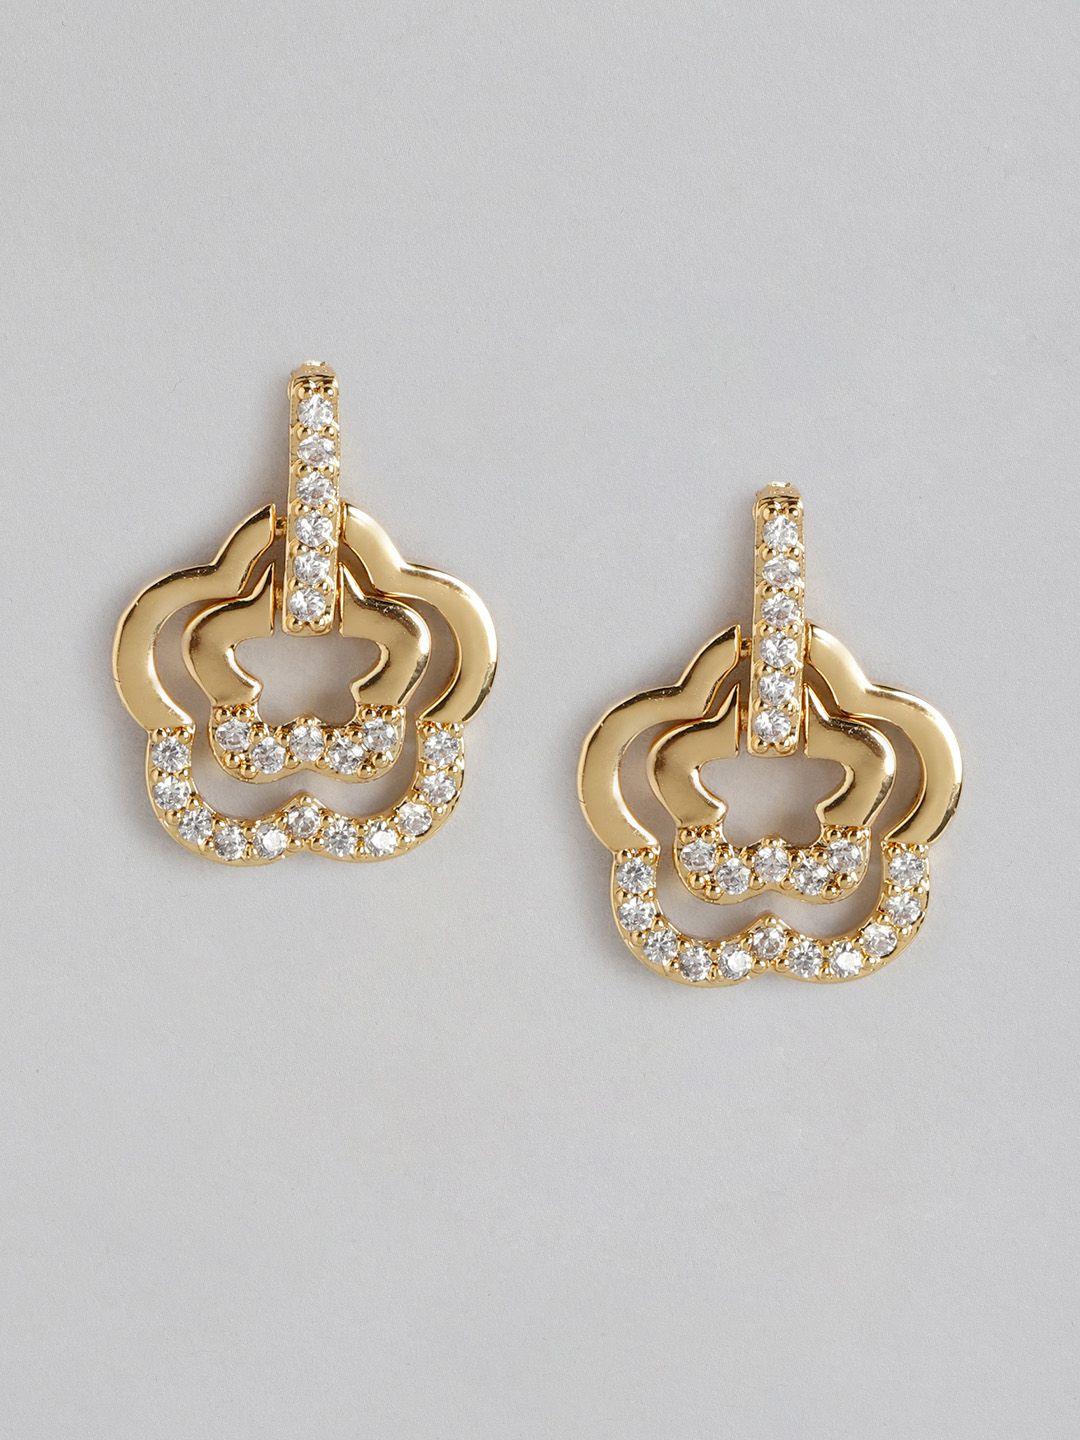 aadvik designs gold-plated ad studded floral studs earrings